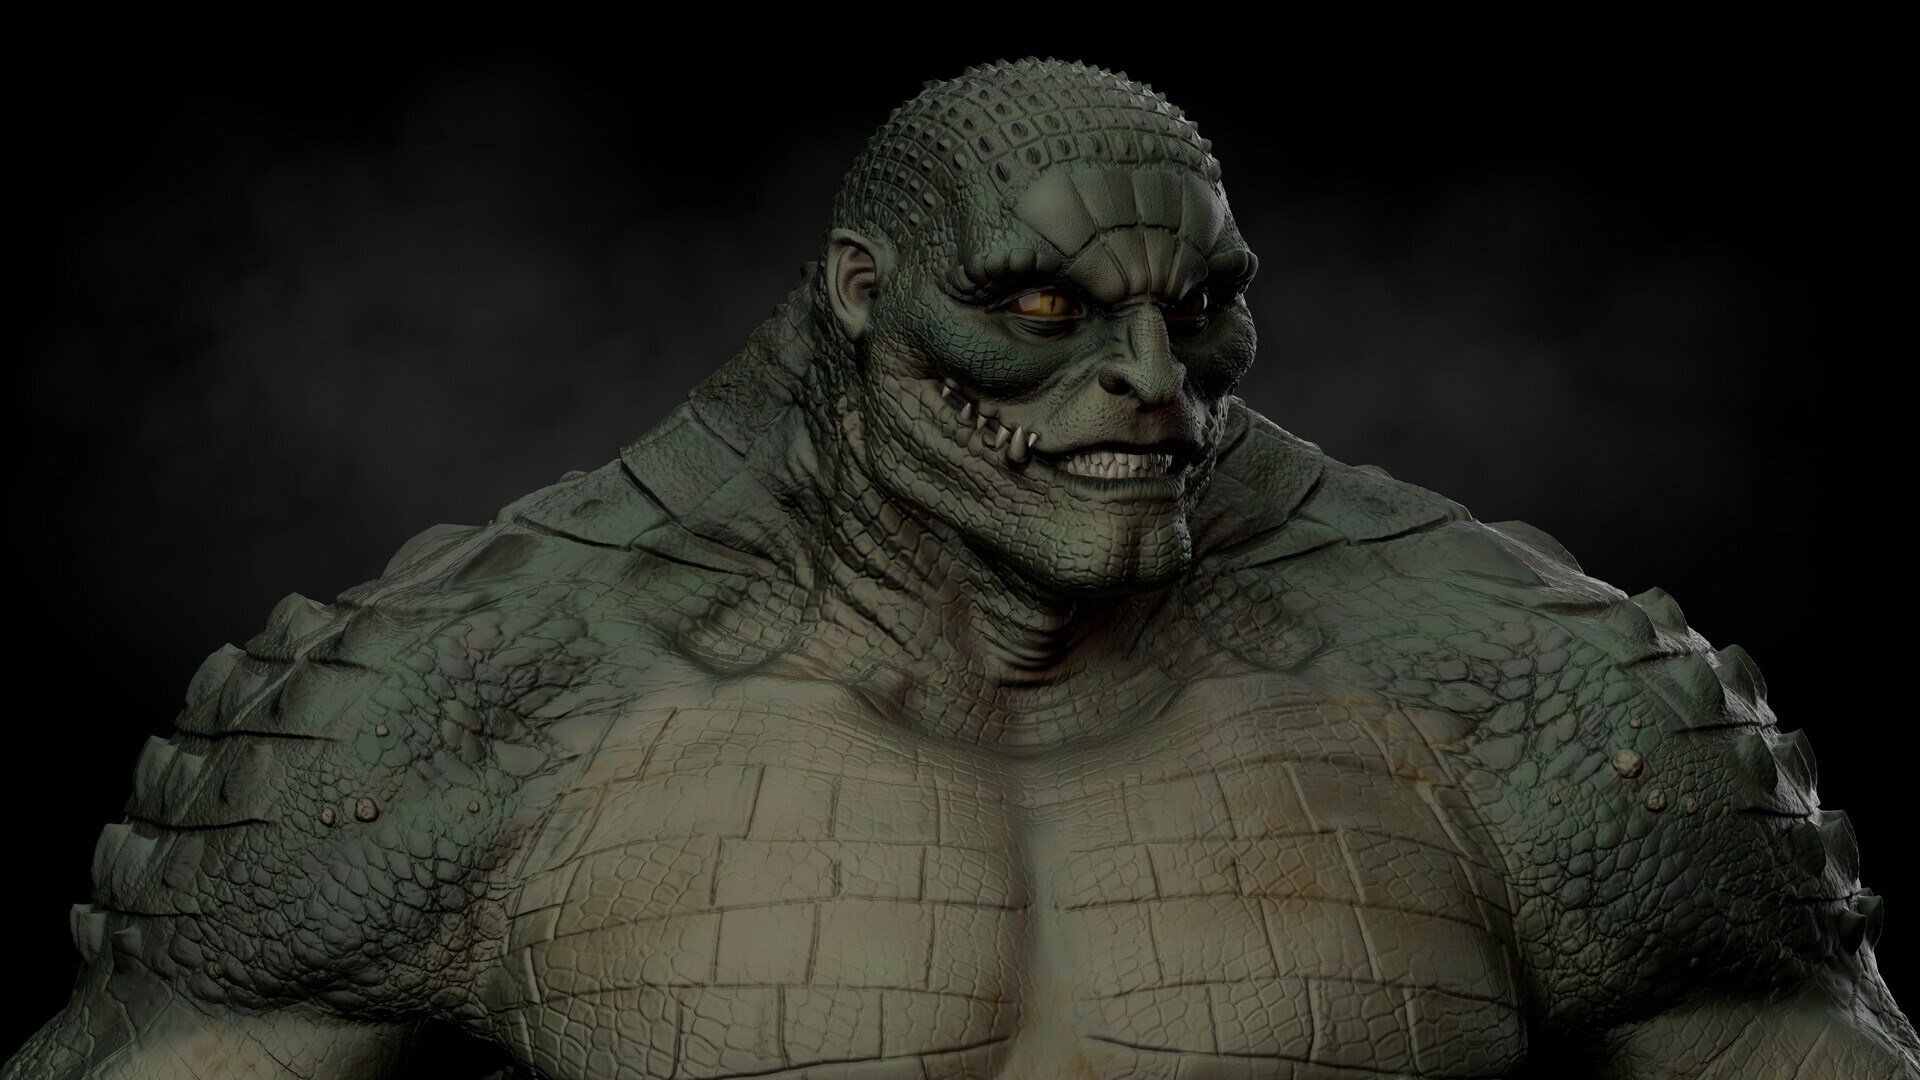 Killer Croc: Appeared in the third season of the Arrowverse series Batwoman, performed by Heidi Ben. 1920x1080 Full HD Wallpaper.